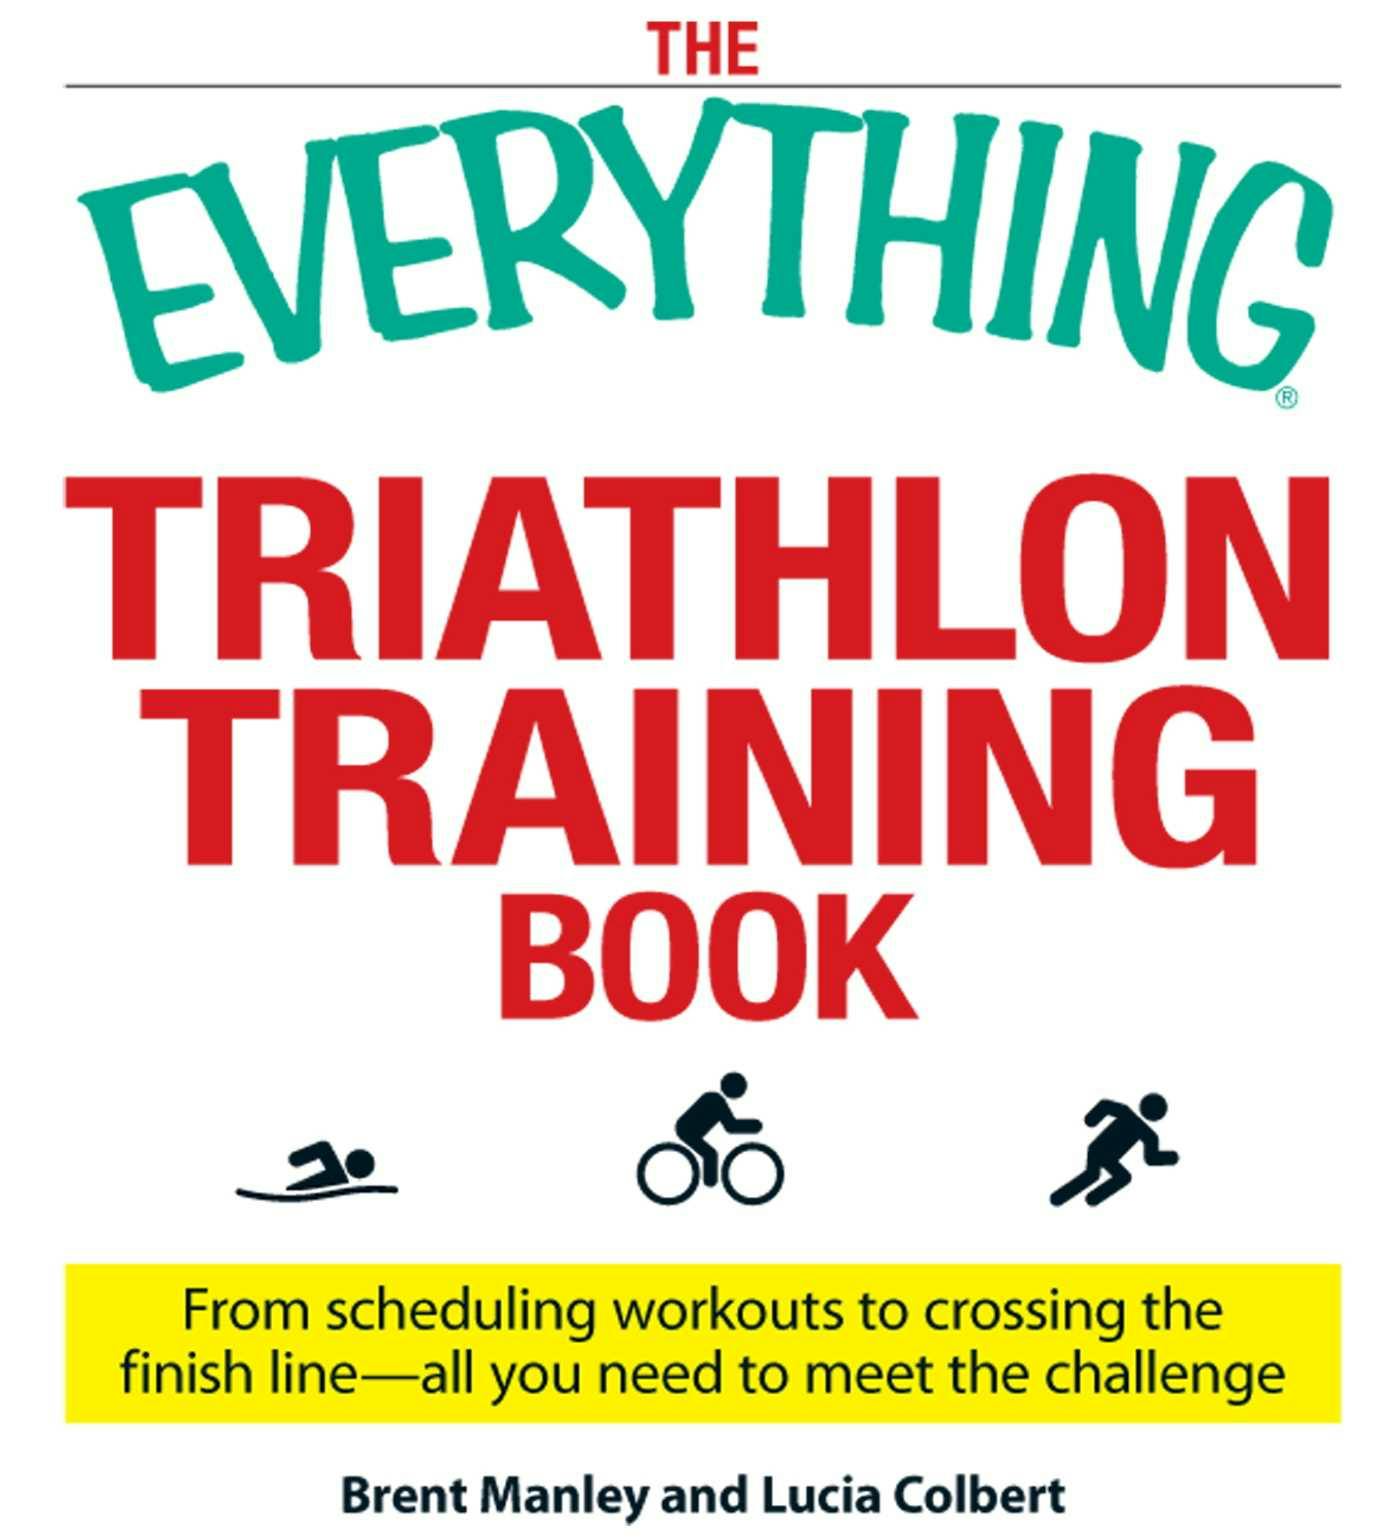 The Everything Triathlon Training Book: From scheduling workouts to crossing the finish line -- all you need to meet the challenge - Lucia Colbert, Brent Manley